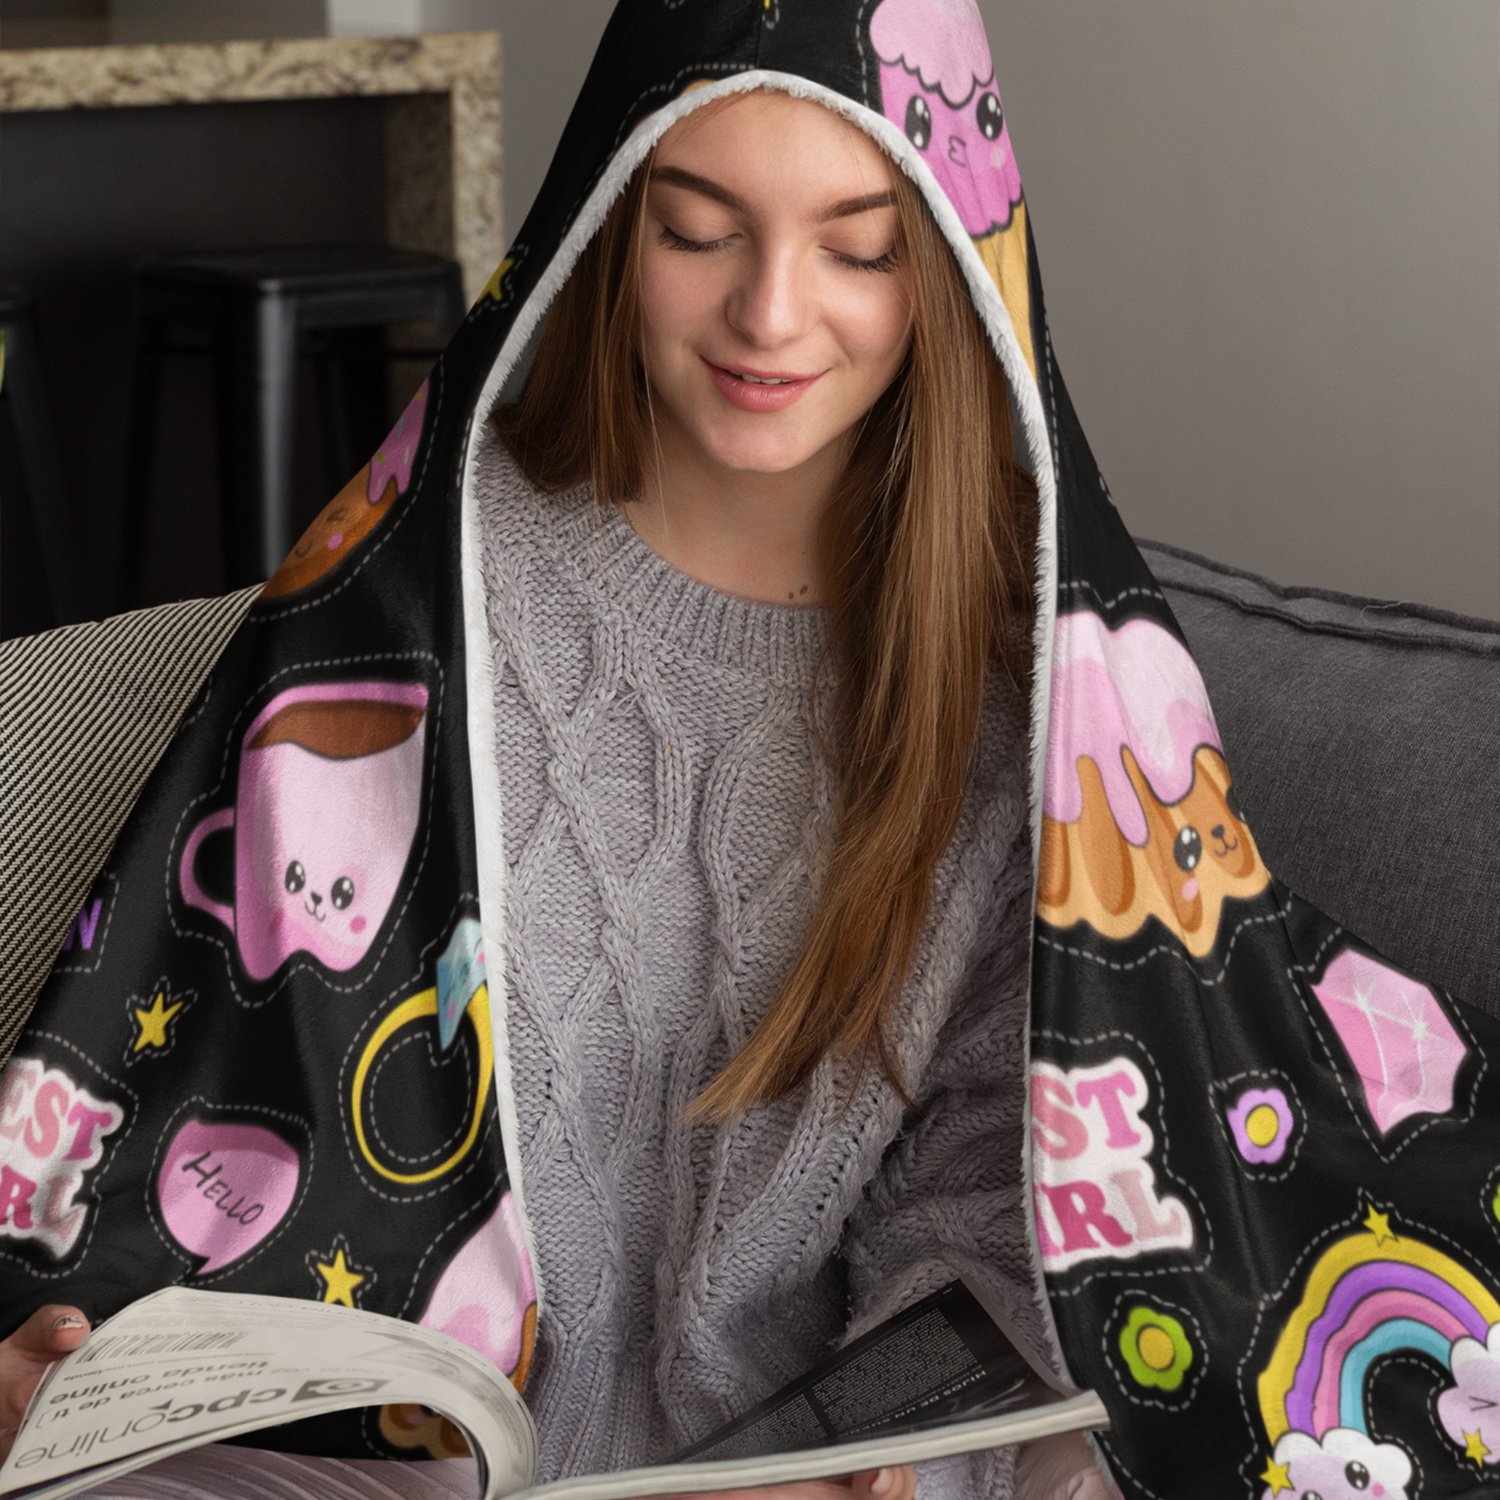 Girl wears premium hooded blanket sublimated printed with Kawaii characters, food, rainbows, cute faces, flowers on a black background